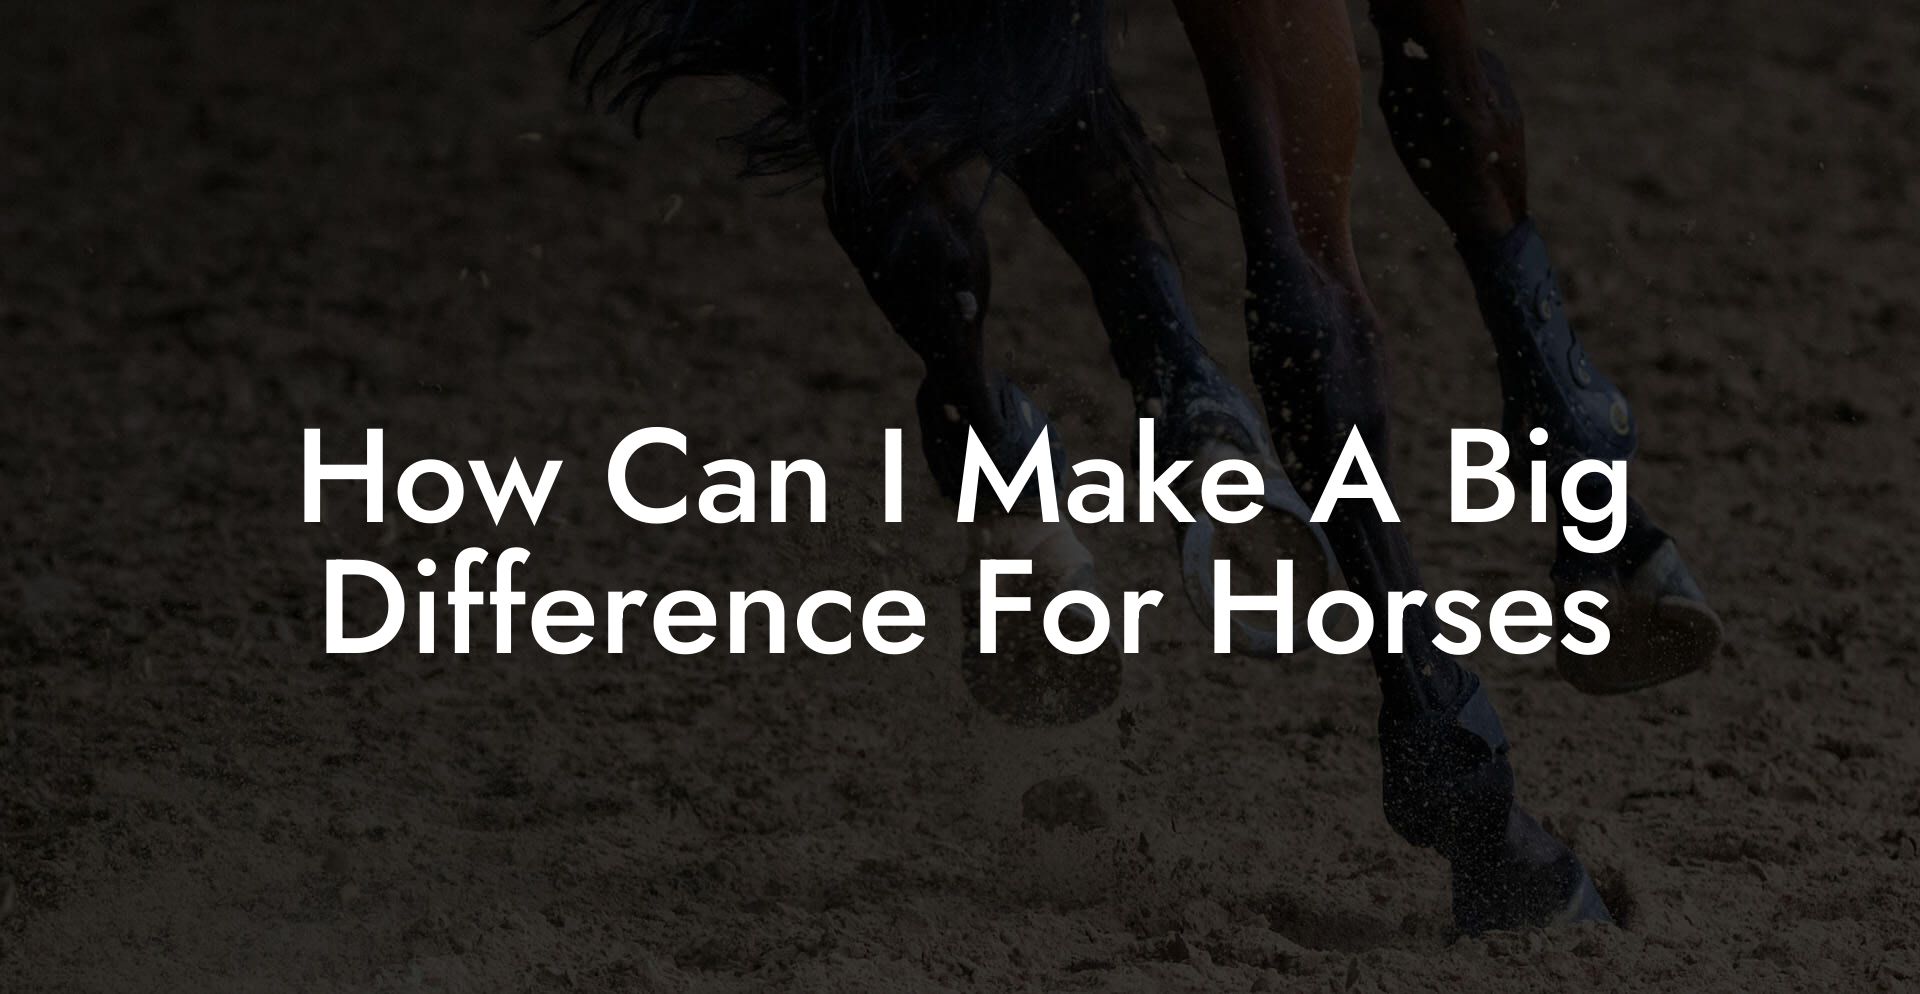 How Can I Make A Big Difference For Horses